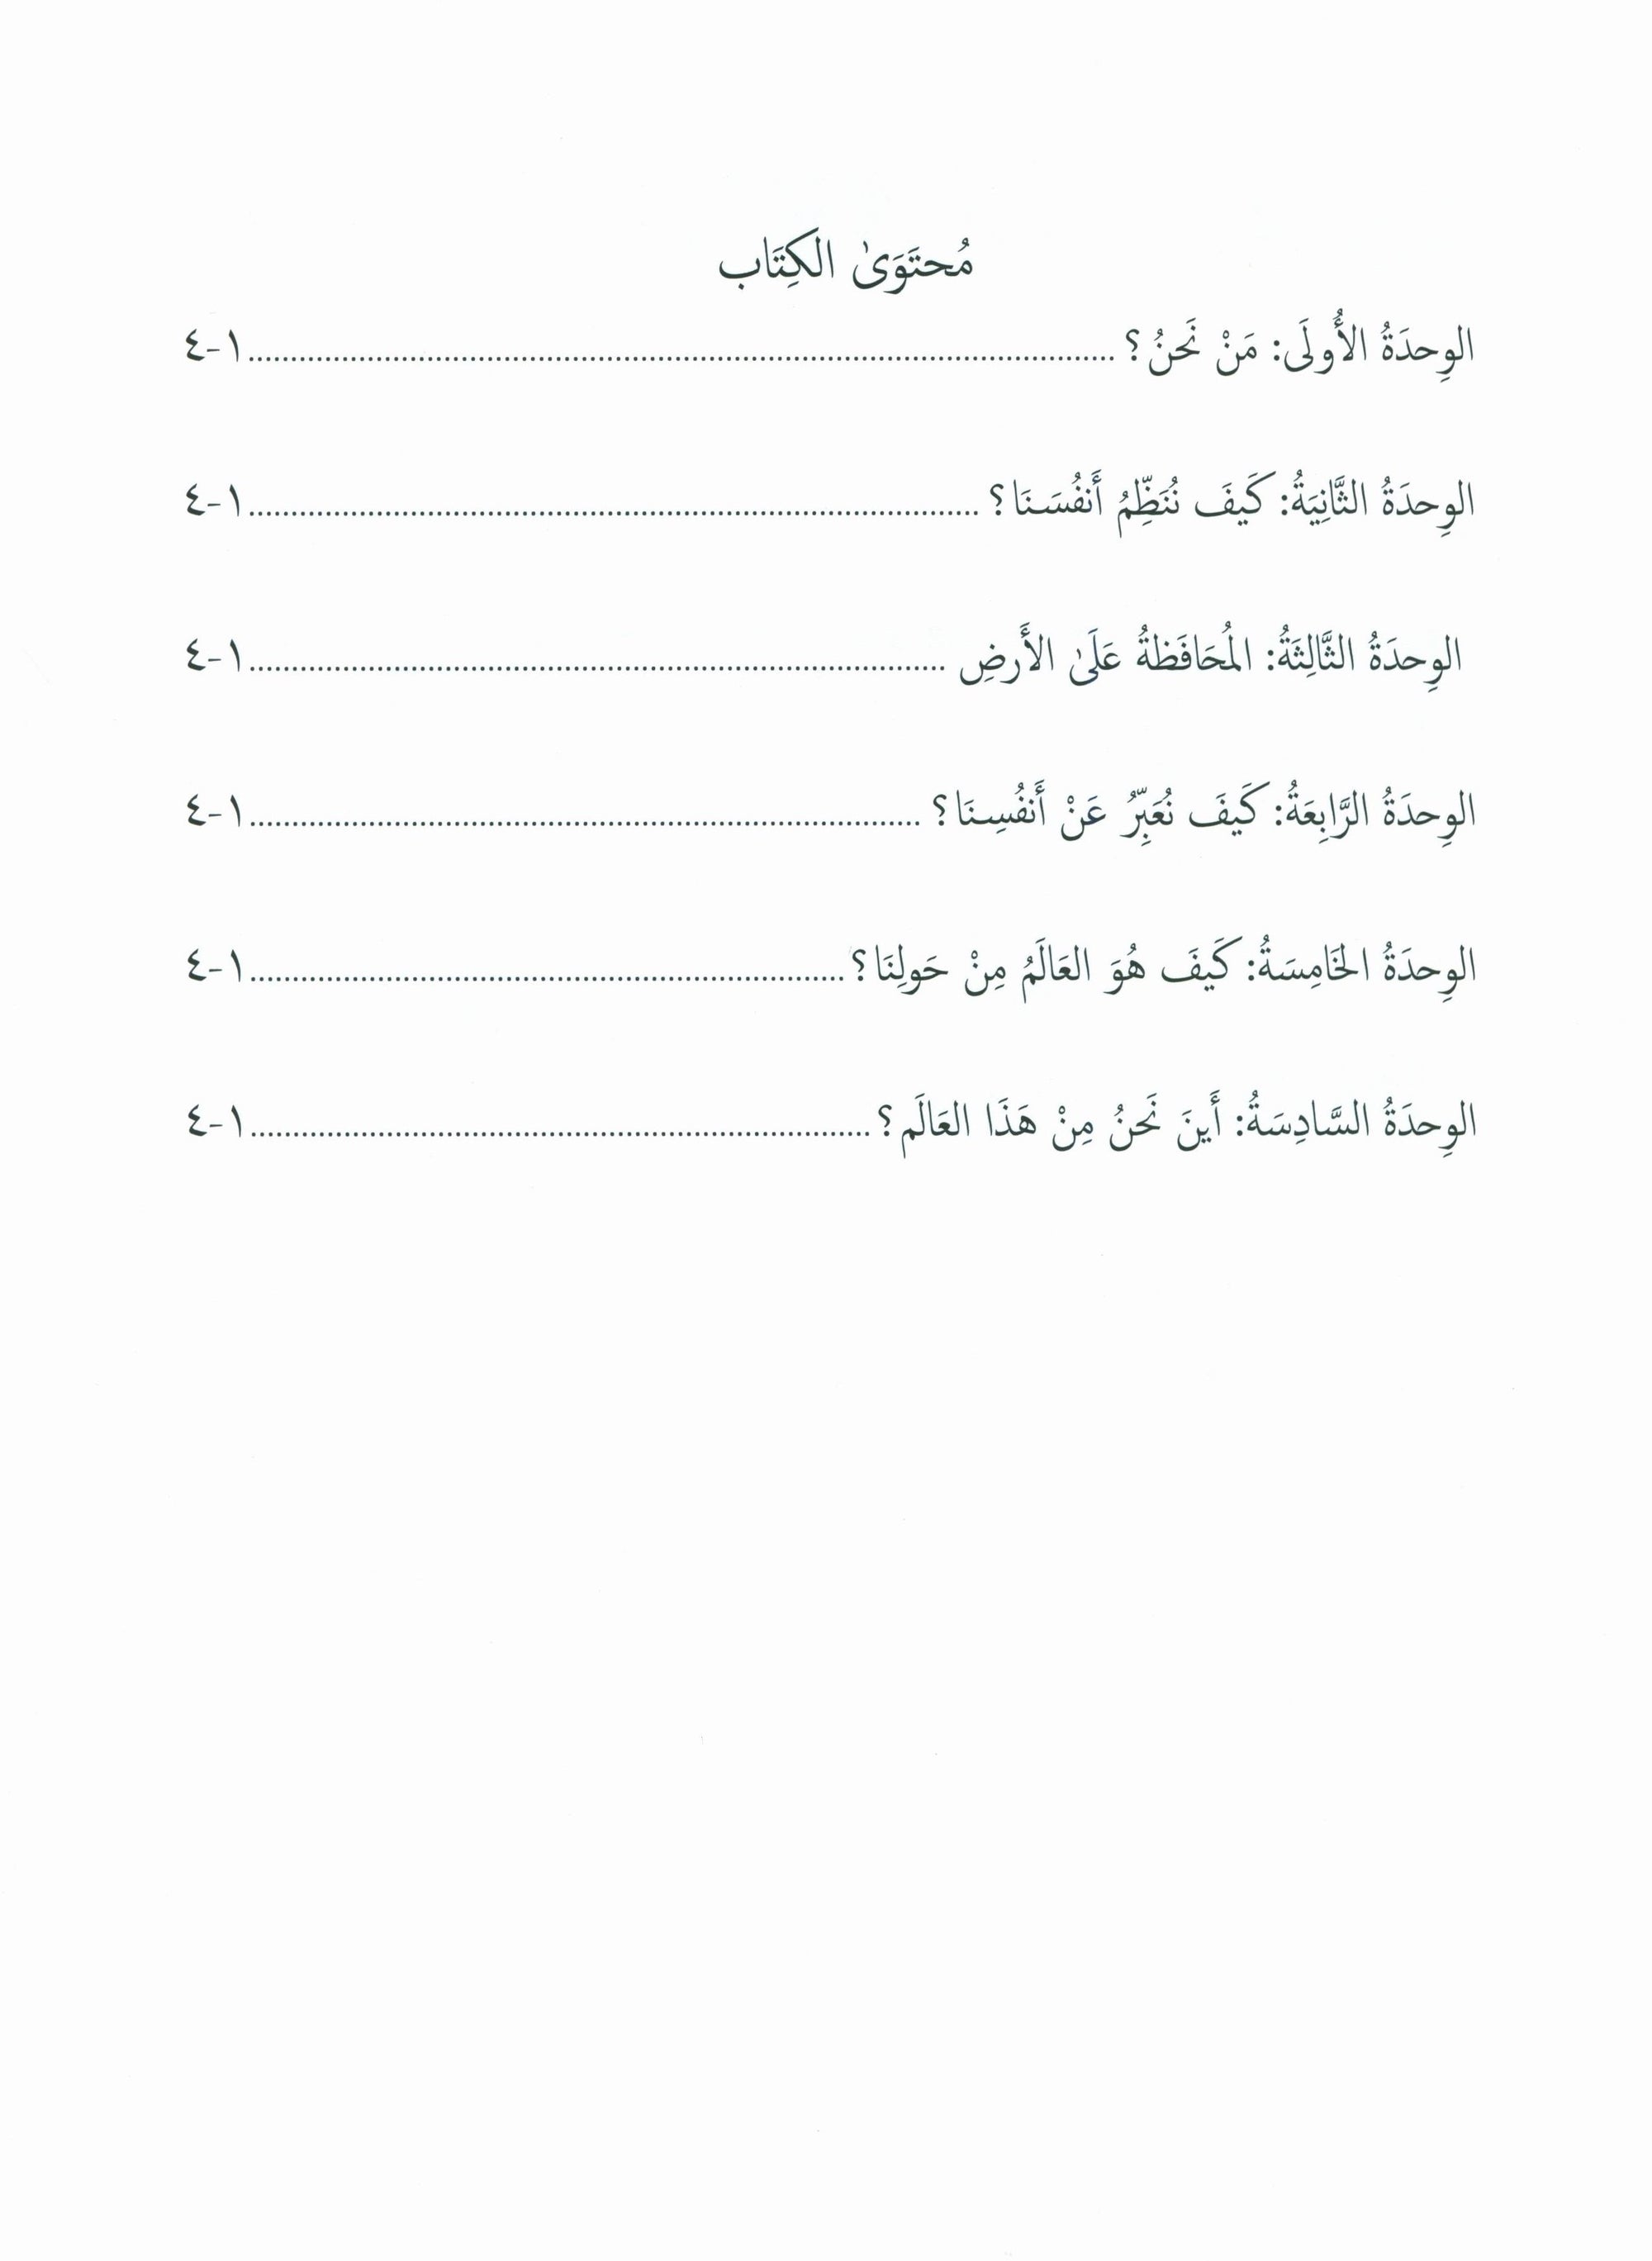 Our Language Is Our Pride Assessment Level 3 لغتنا فخرنا